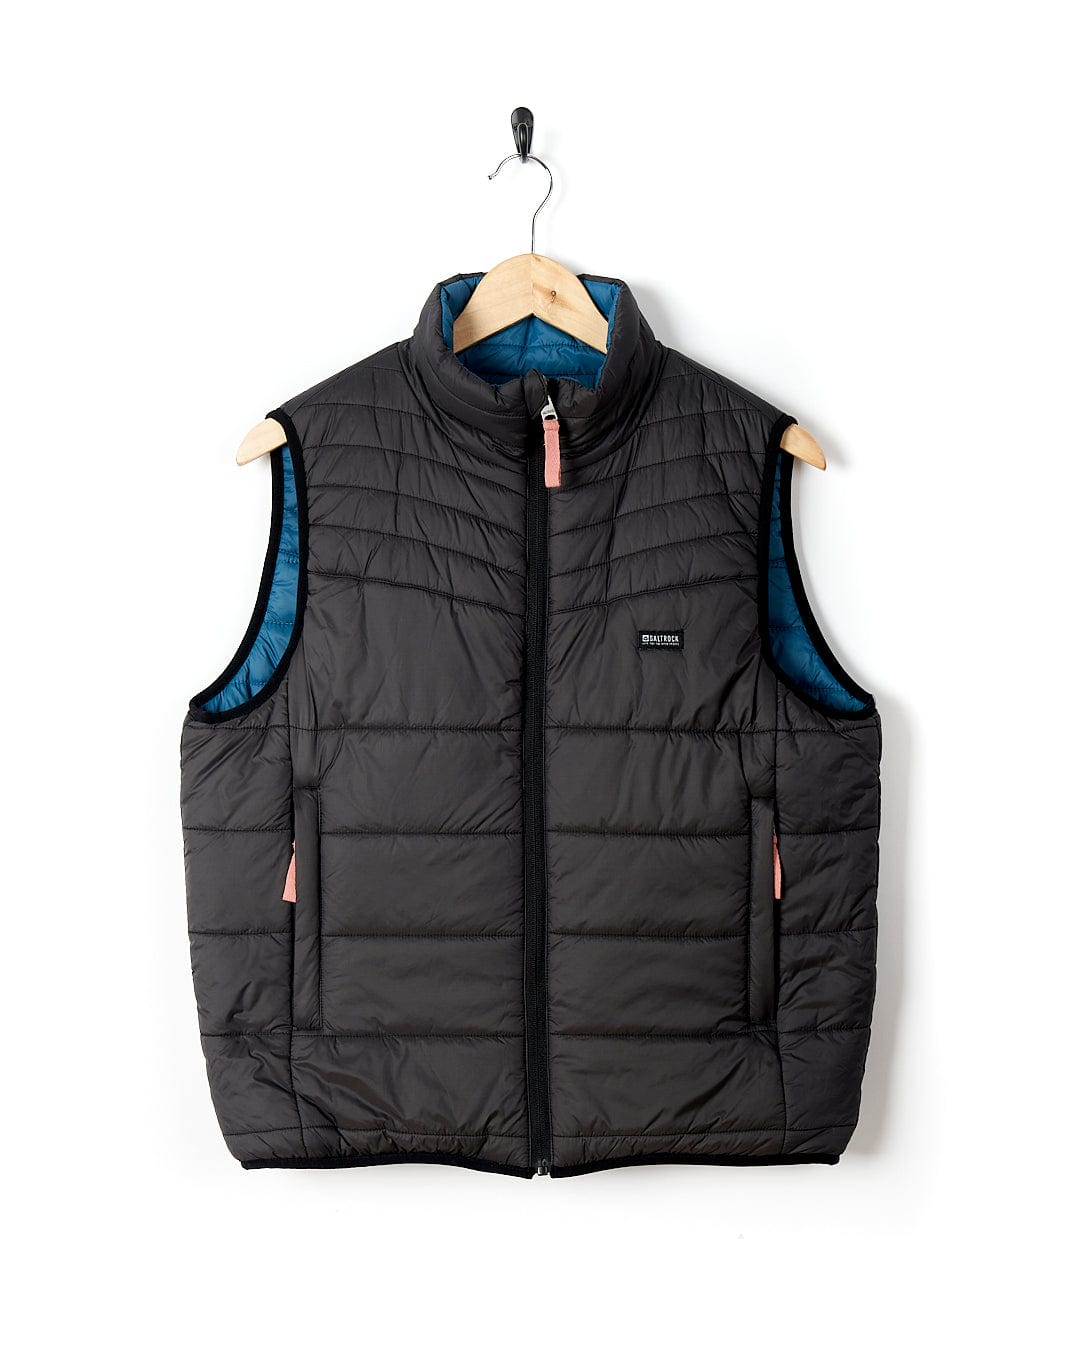 A water-resistant Saltrock blue puffy vest hanging on a hanger.